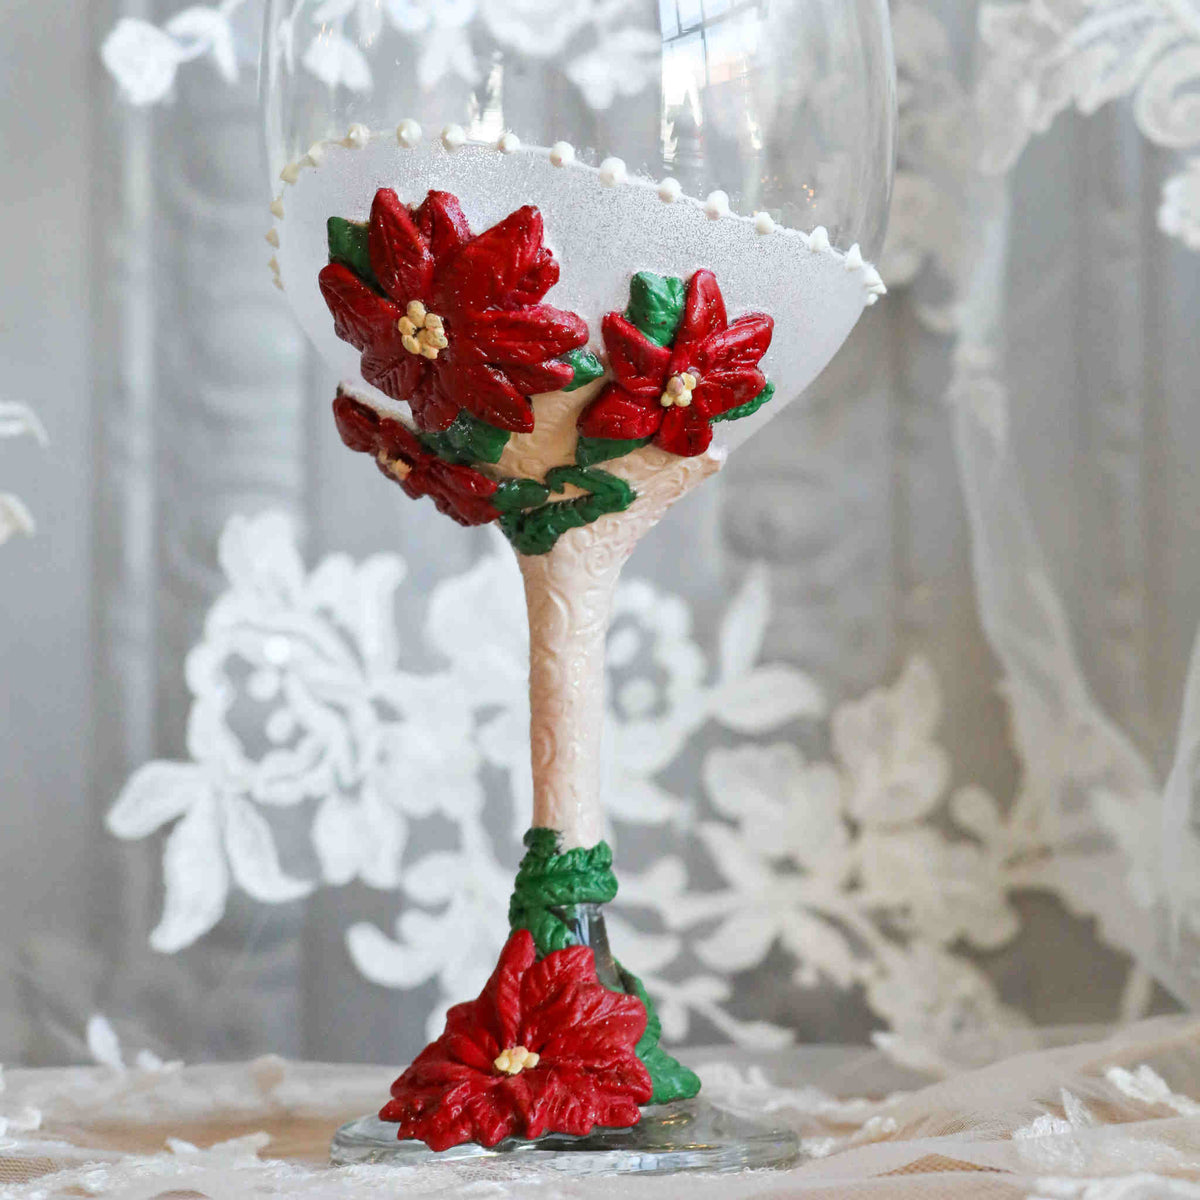 Perfect for any Christmas themed wedding or event, our Poinsettia Wine Glasses are perfect for yourself or as a gift.  Each wine glass sits atop a hand-scuplted polymer clay painted stem of red poinsettias, complimented with soft shimmery magical glitter.